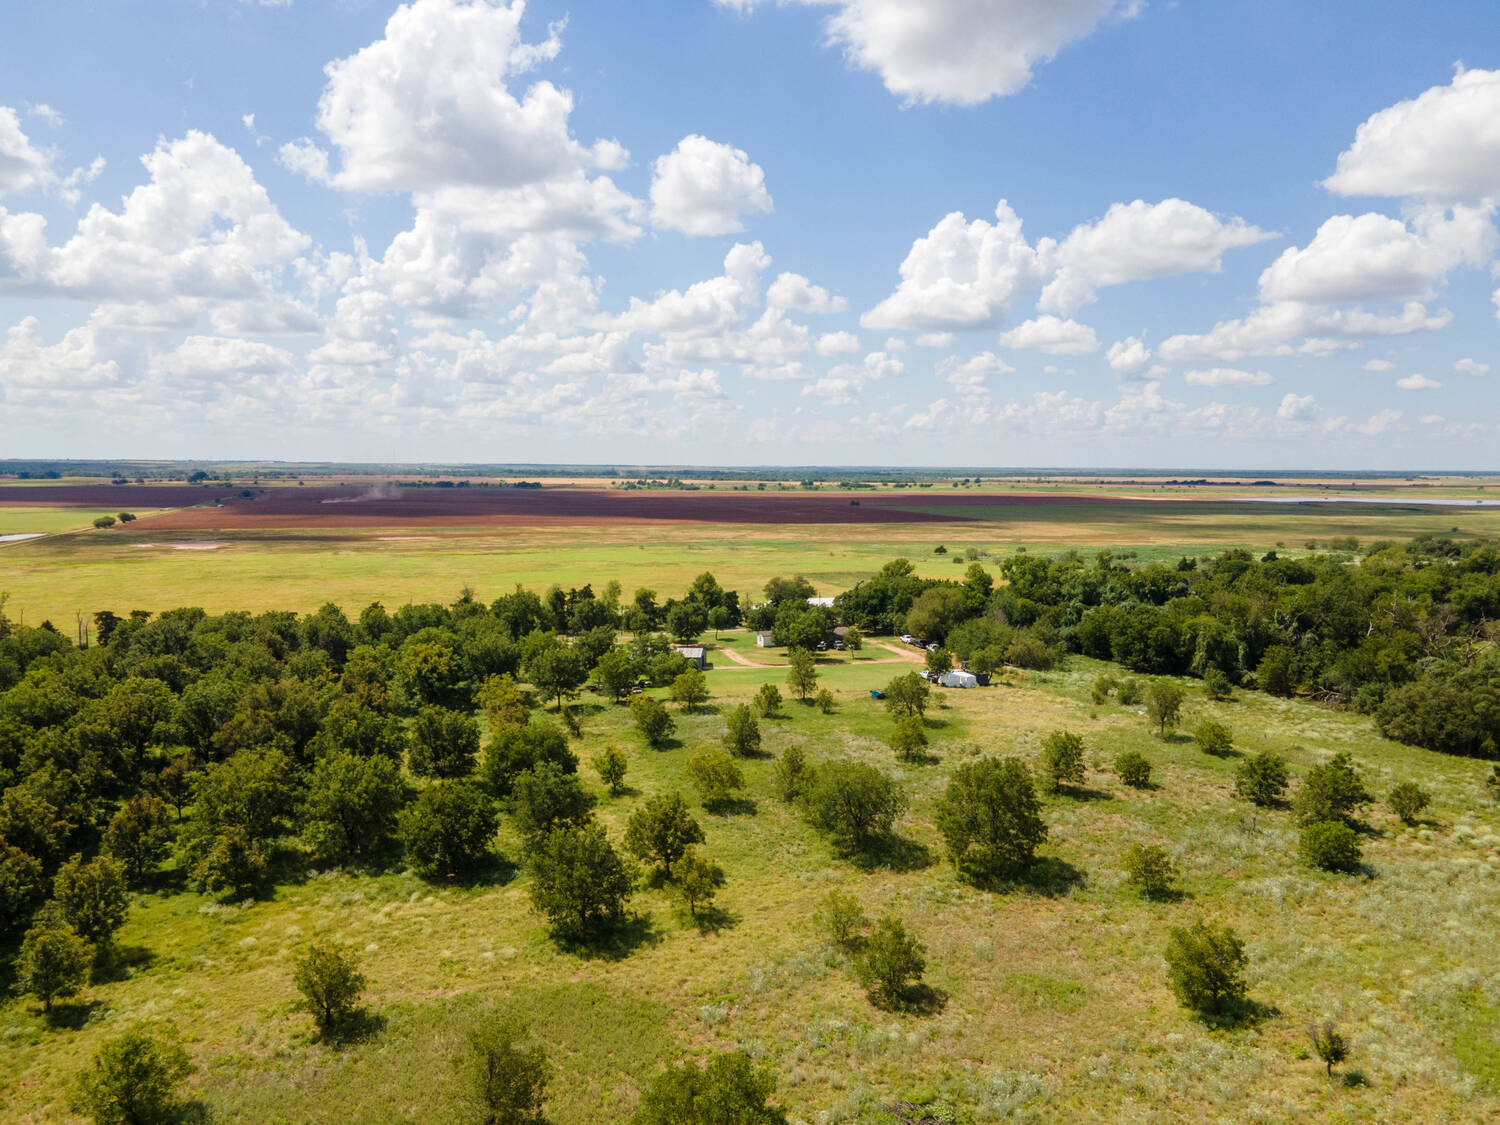 The-Pecan-Tract-Clay-County-Pecan-Orchard-Hunting-Ranch-TX-Republic-Ranches-Bryan-Pickens-5-of-15